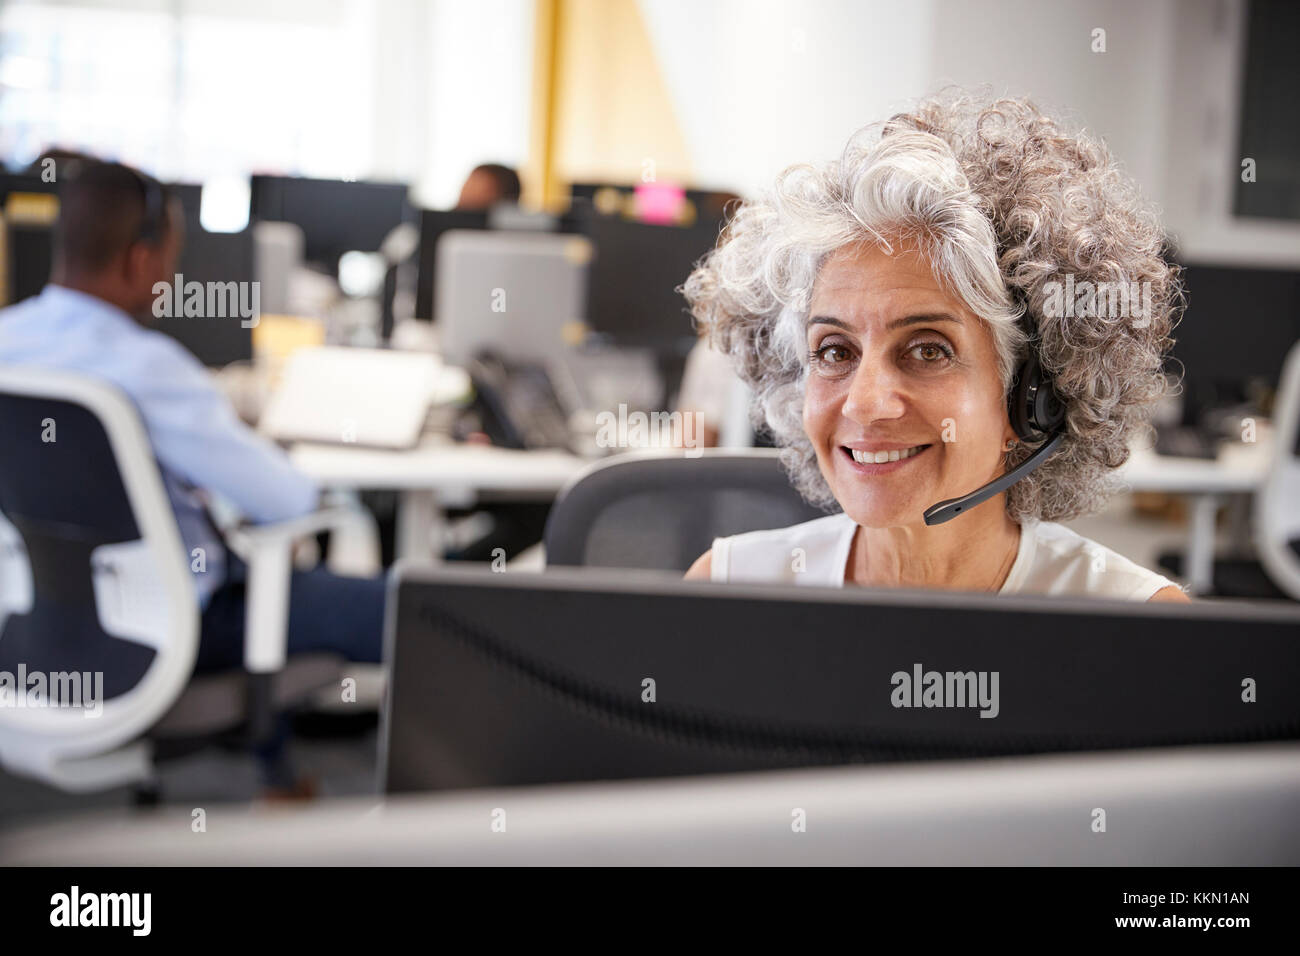 Middle aged woman working at computer with headset in office Stock Photo